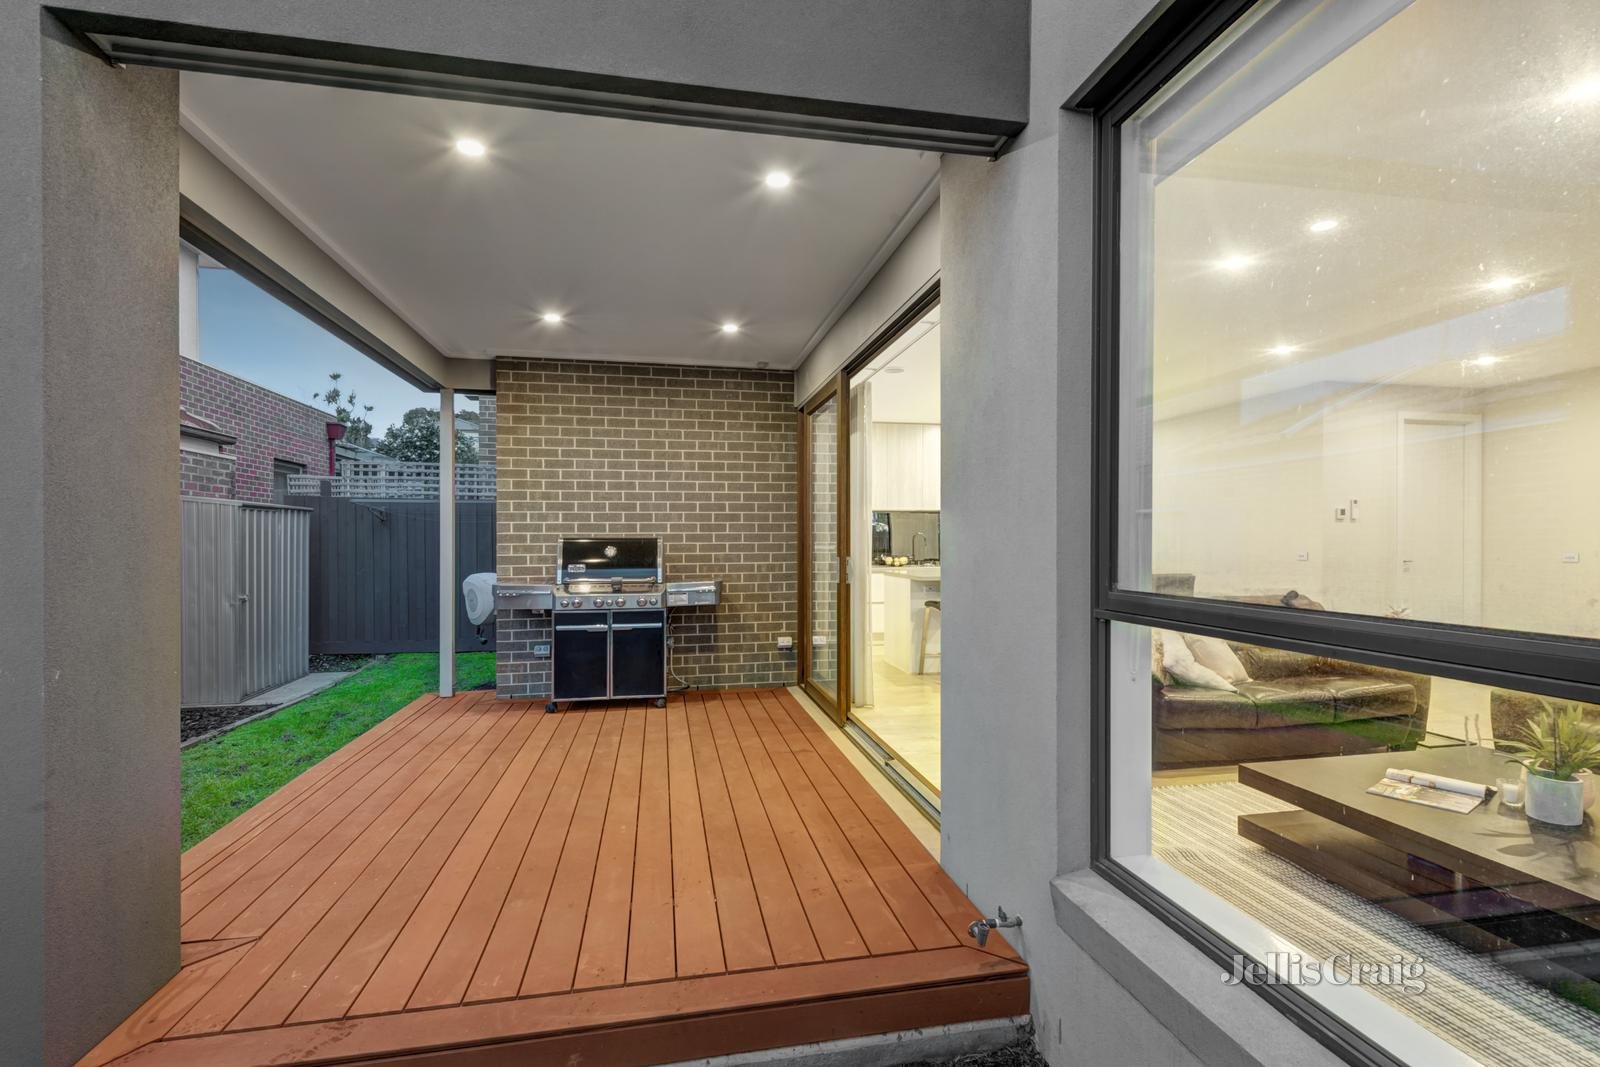 1B Daly Street, Doncaster image 9